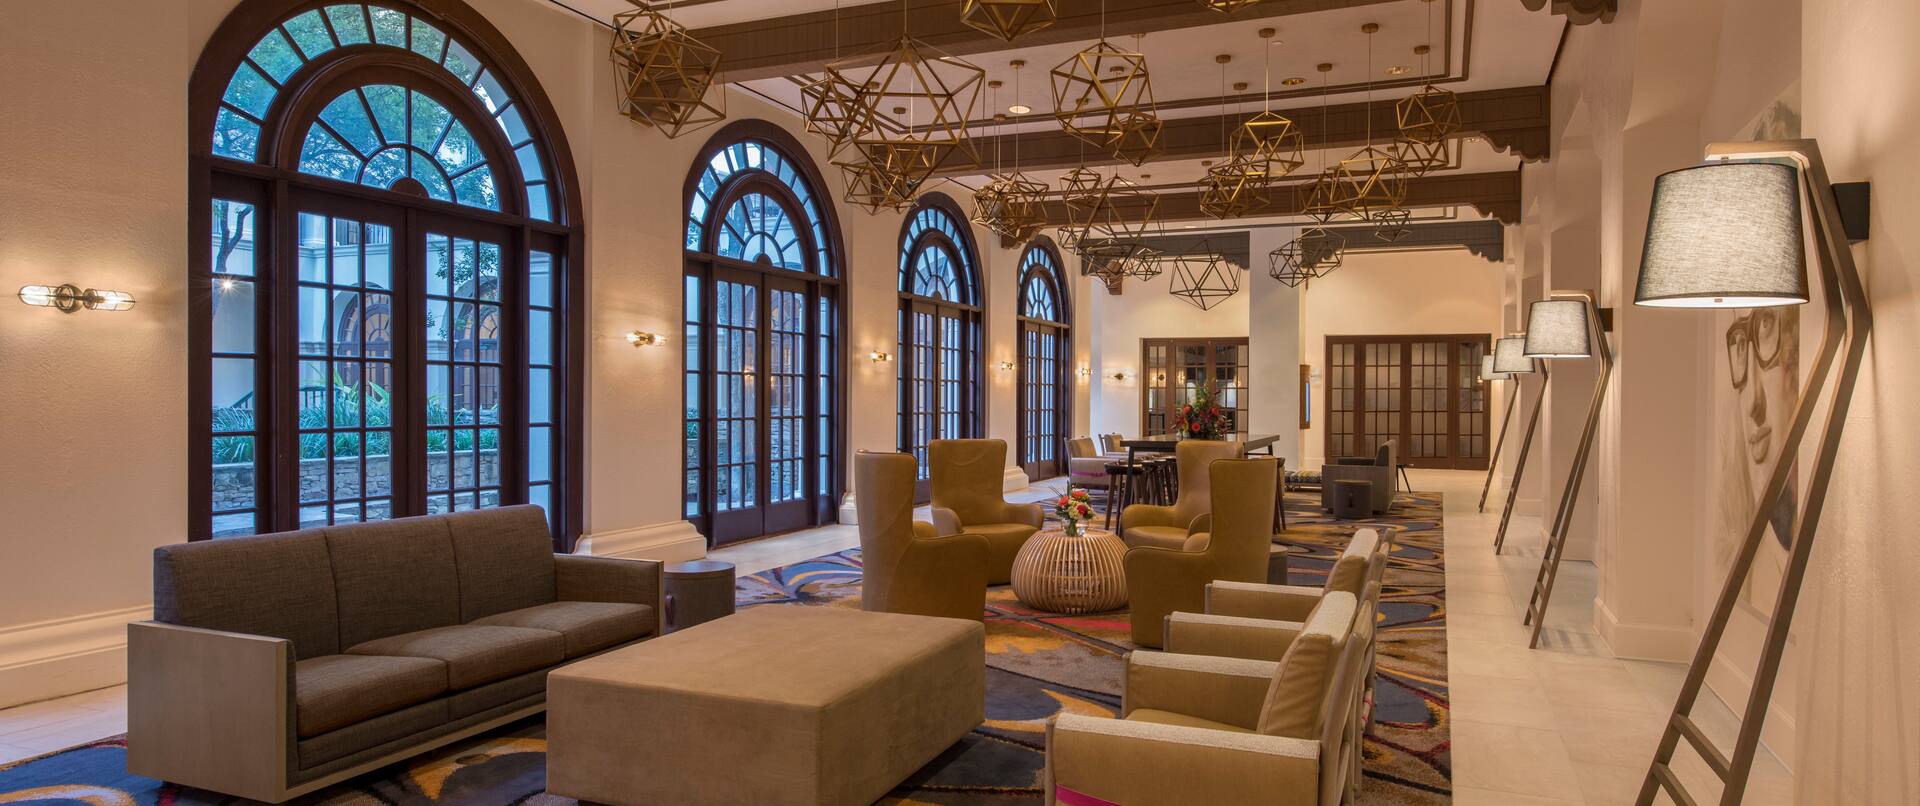 Wide View of Windows, Soft Seating, and Decorative Lighting in Lobby Colonnade Area